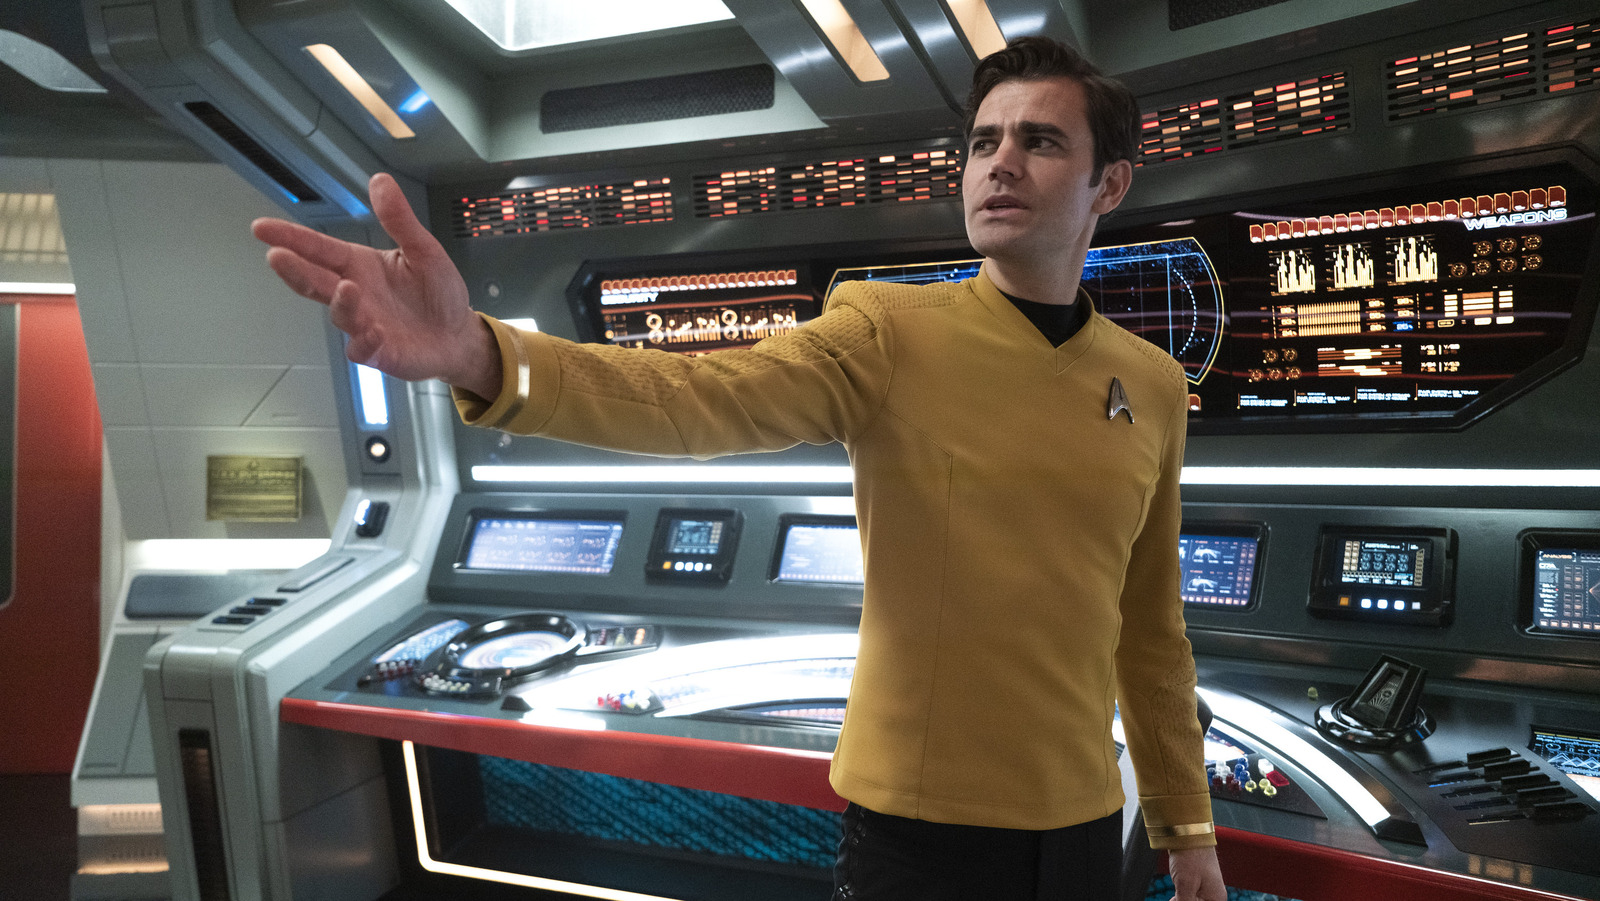 Star Trek: Strange New Worlds Season 2 Episode 9 Is The Silly One Among Silly Ones (And A Musical, Too)